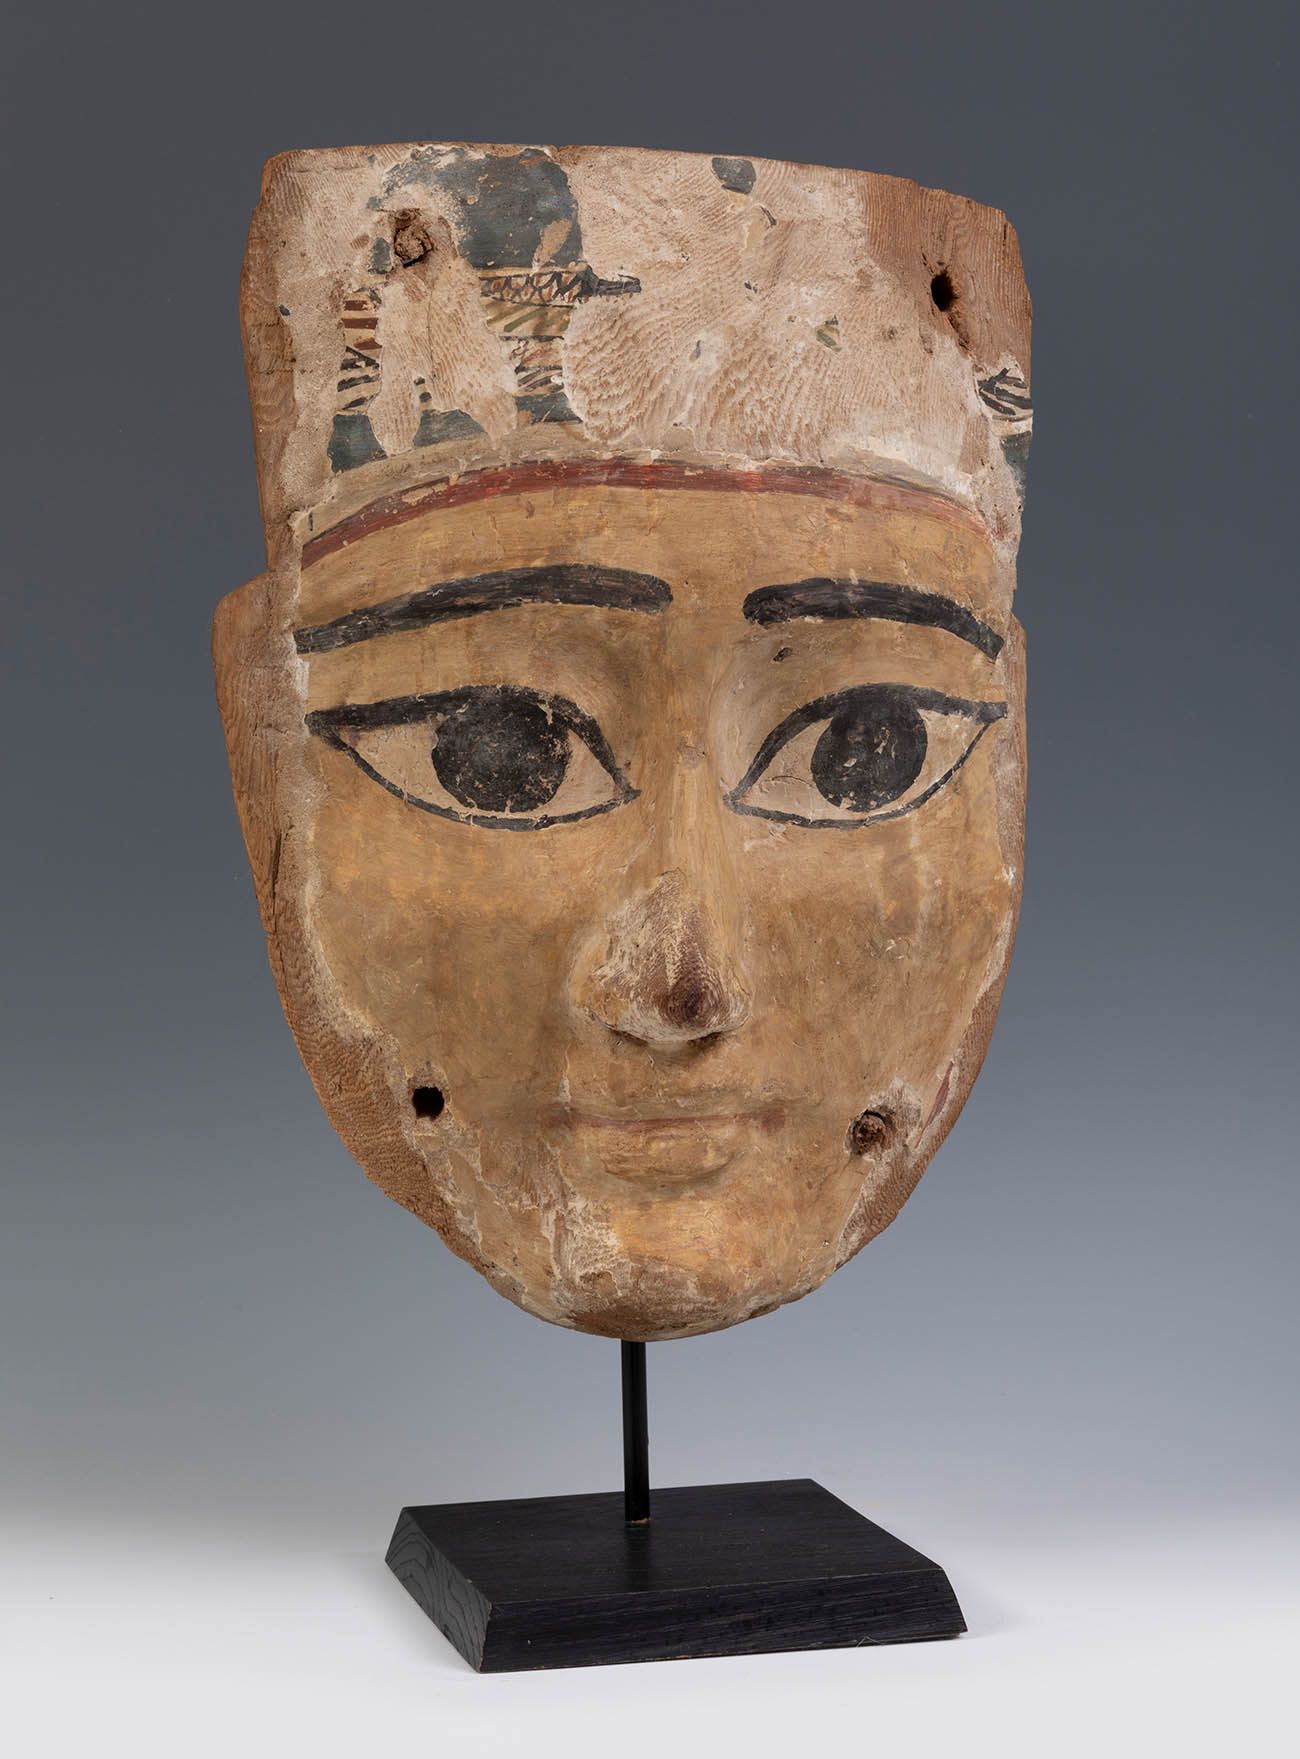 Egyptian mask. Low period, ca. 6th century BC. Masque égyptien. Basse période, v&hellip;